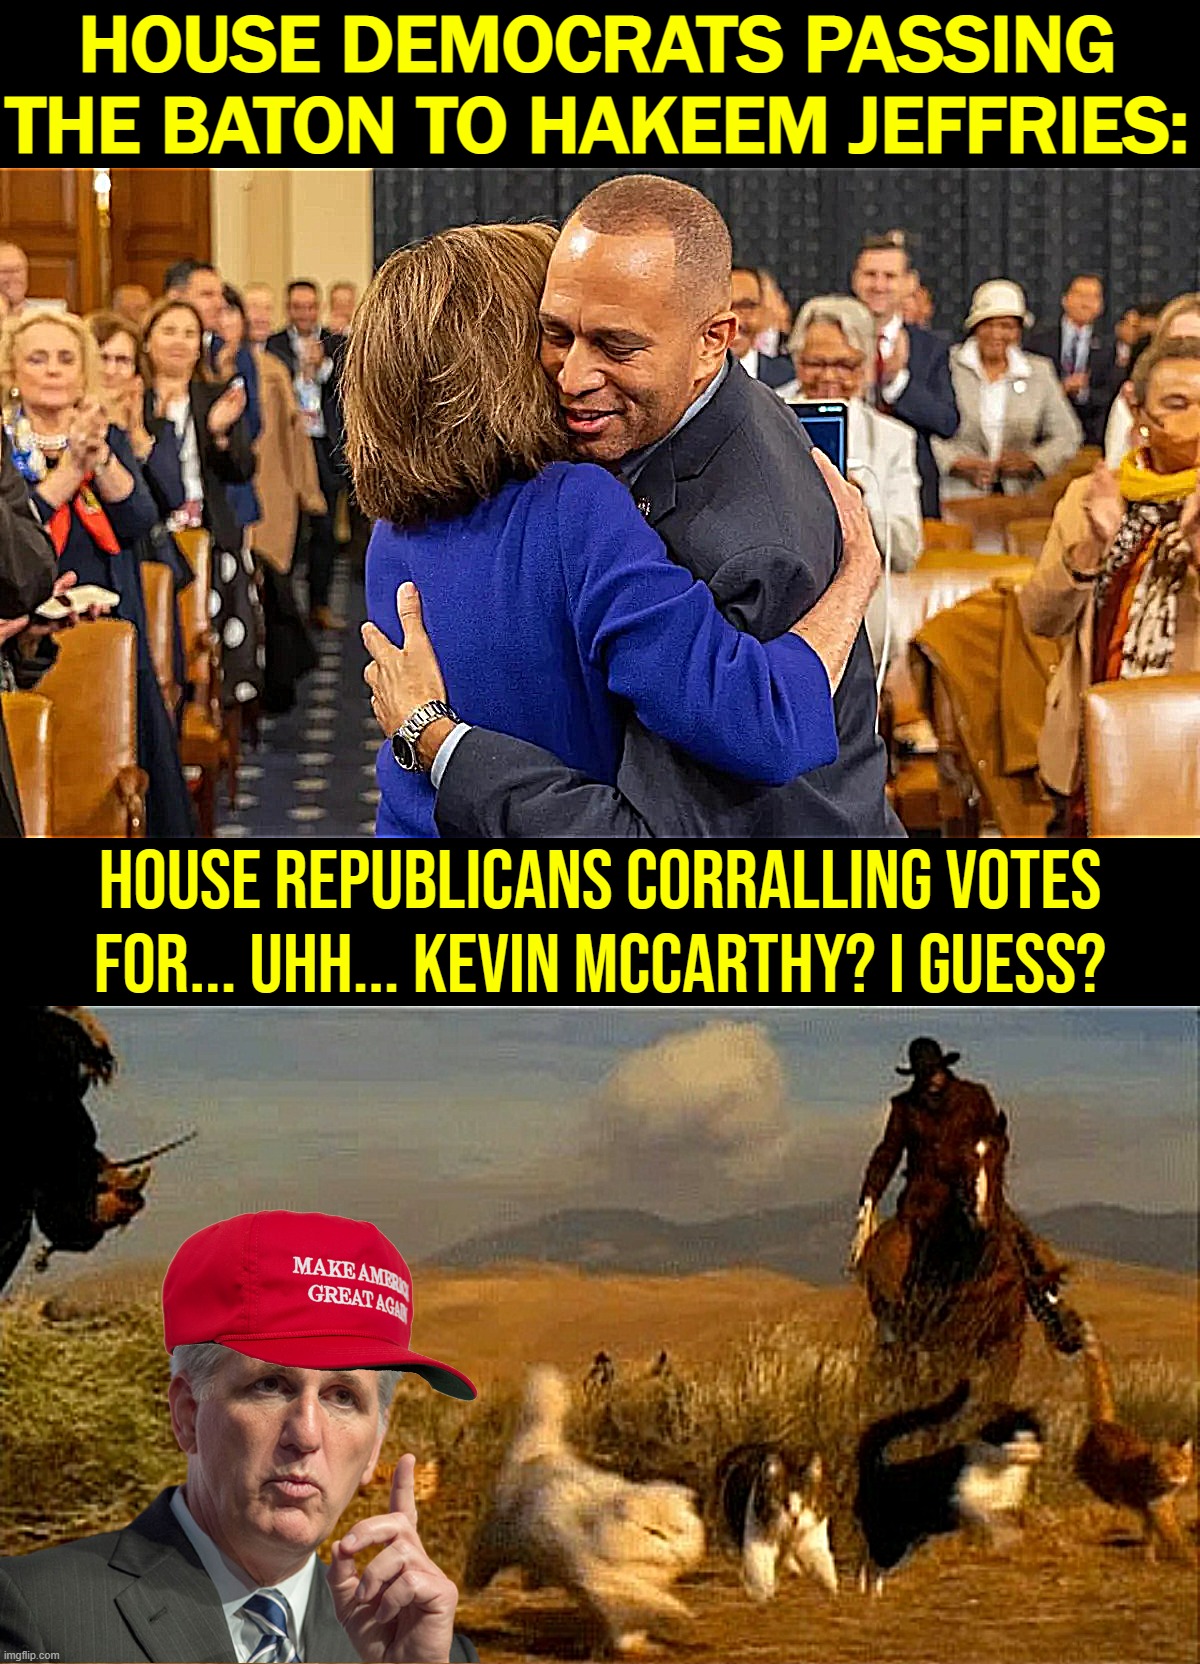 Republicans in disarray! | HOUSE DEMOCRATS PASSING THE BATON TO HAKEEM JEFFRIES:; House Republicans corralling votes for... uhh... Kevin McCarthy? I guess? | image tagged in hakeem jeffries and nancy pelosi,herding cats | made w/ Imgflip meme maker